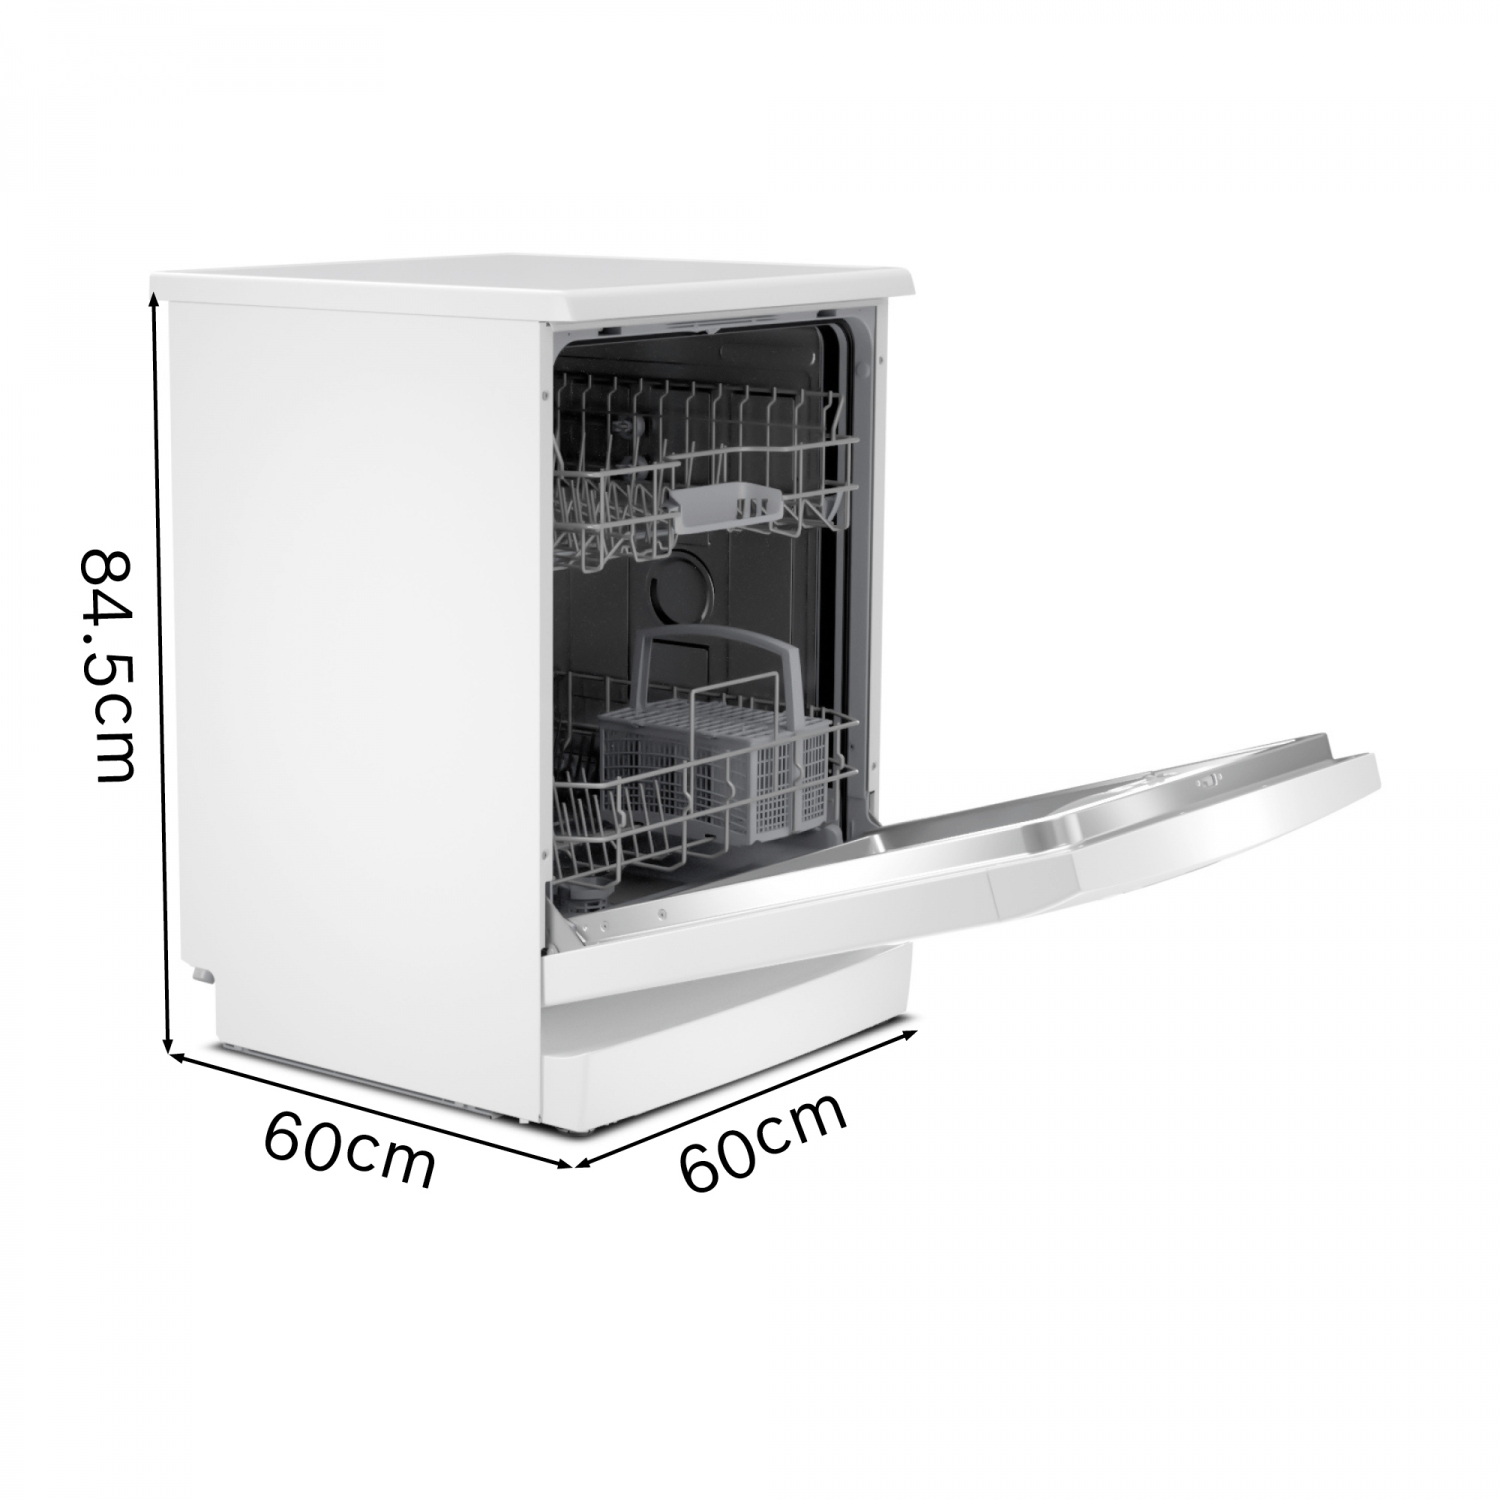 Bosch SGS2ITW08G Full Size Dishwasher - White - 12 Place Settings - 5